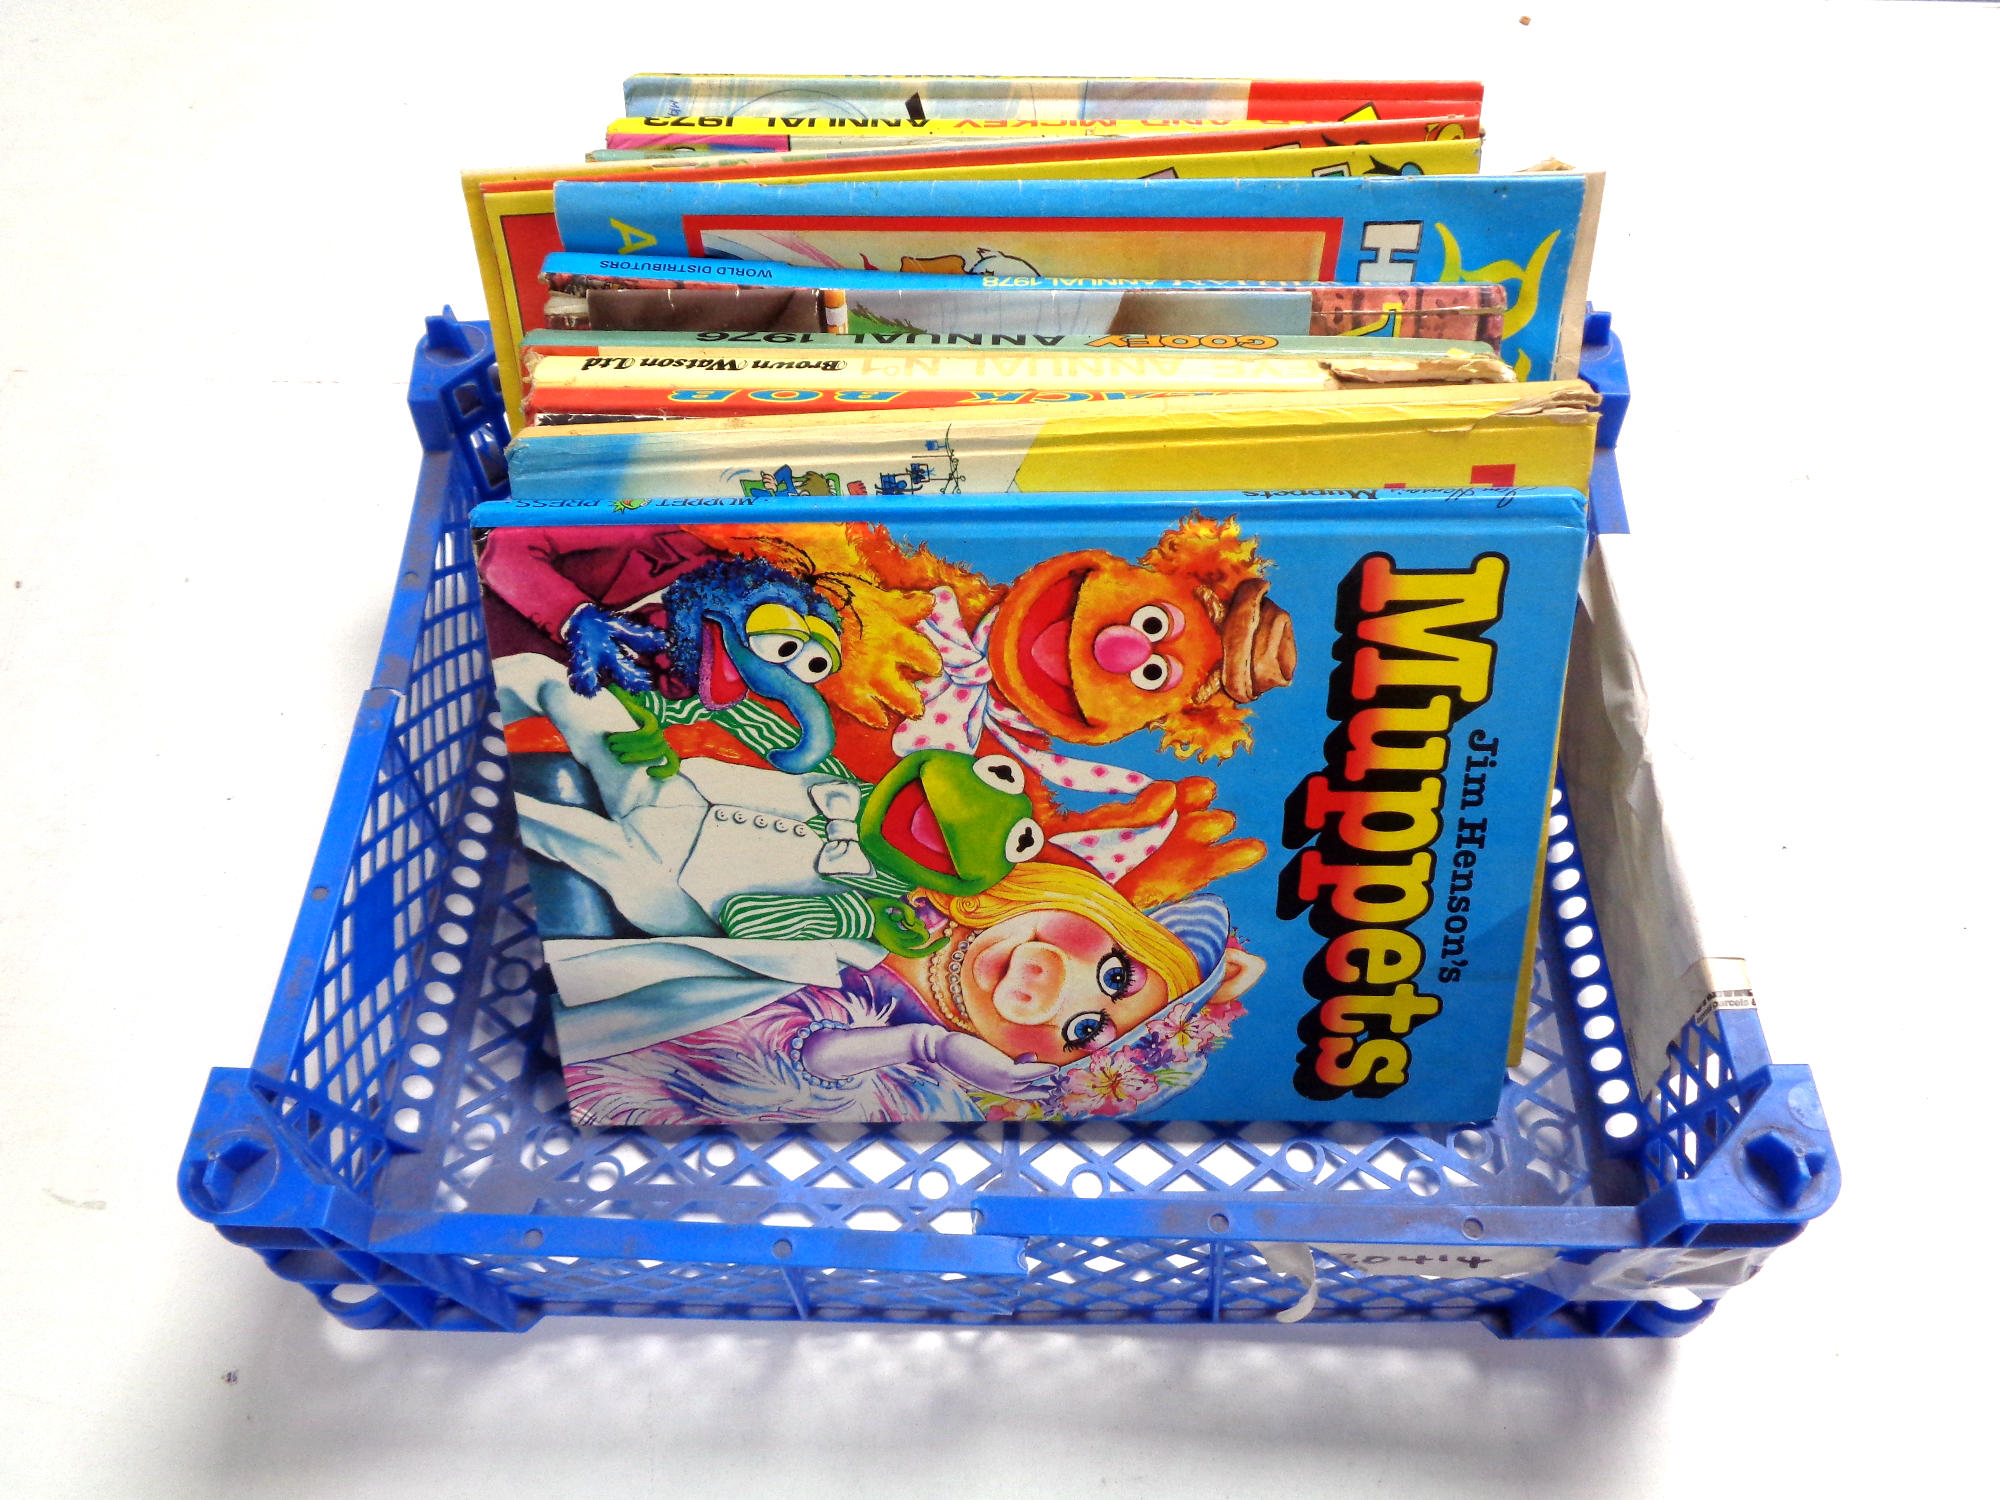 A crate containing children's annuals